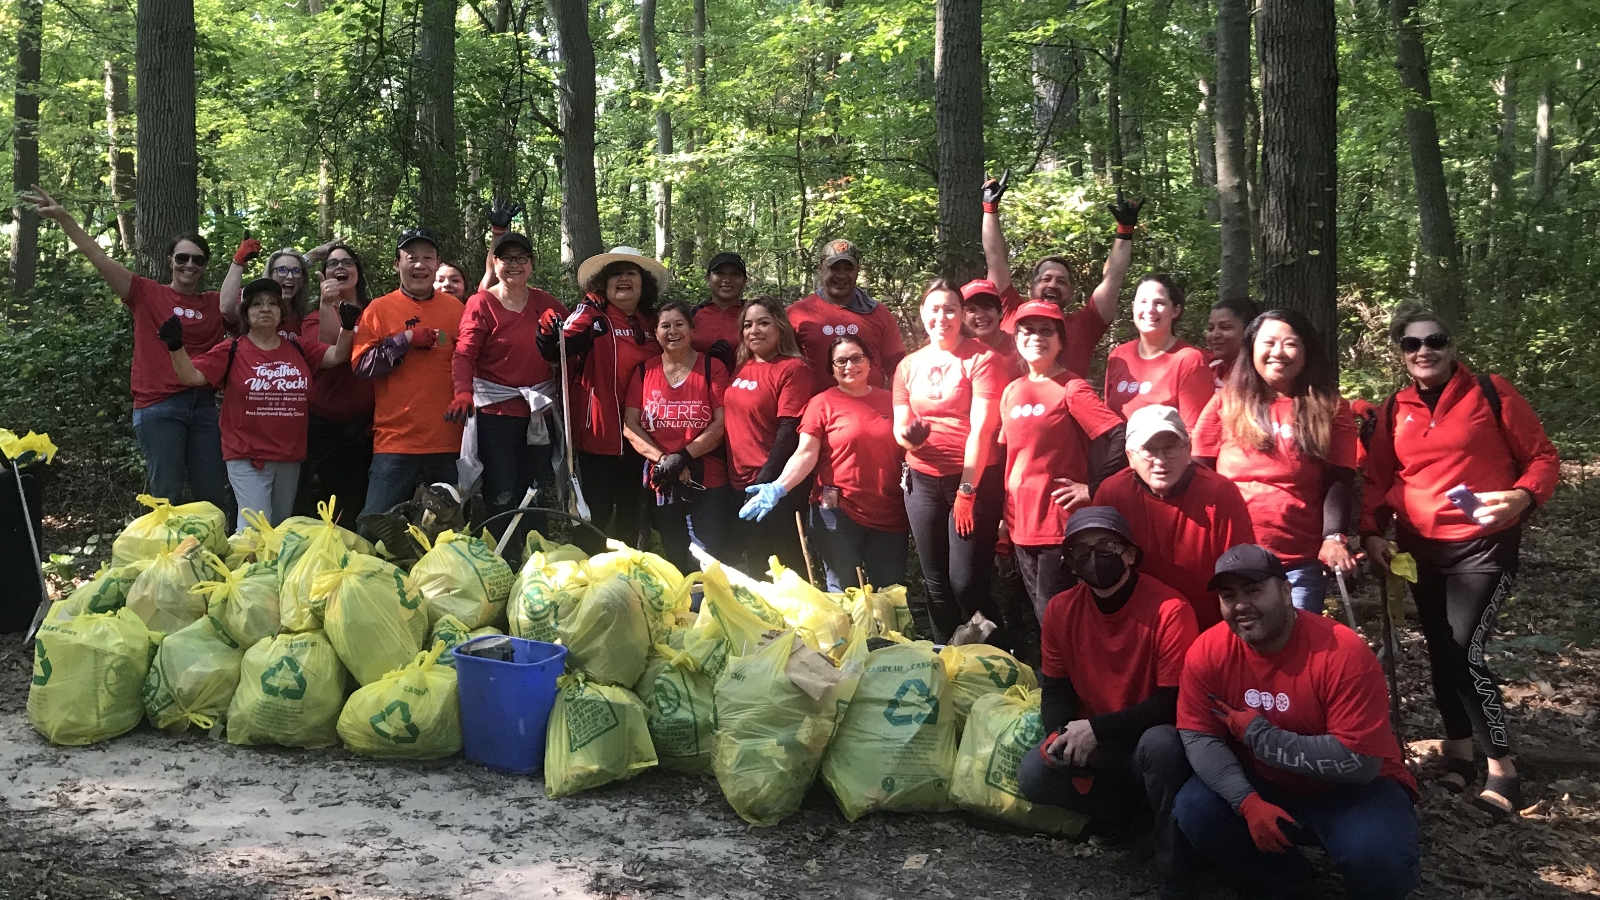 Shiseido Americas employees take part in cleaning a beach